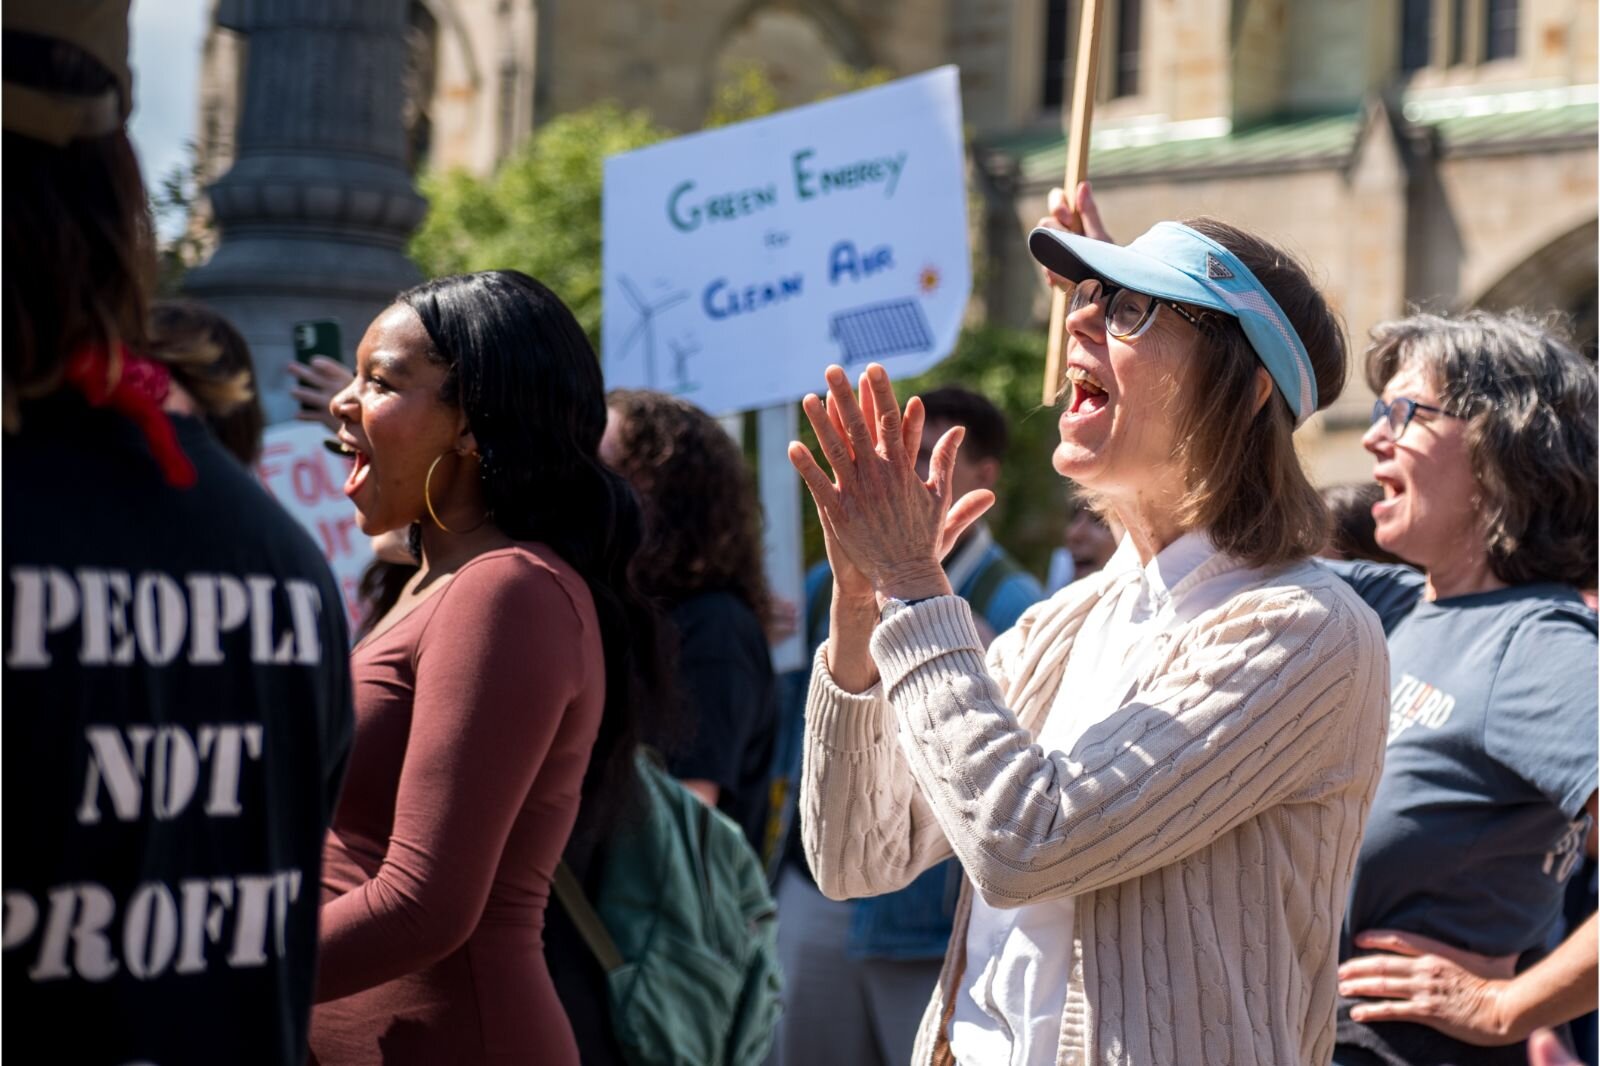 Many parents and other adults came out to support the Youth Climate Strike.